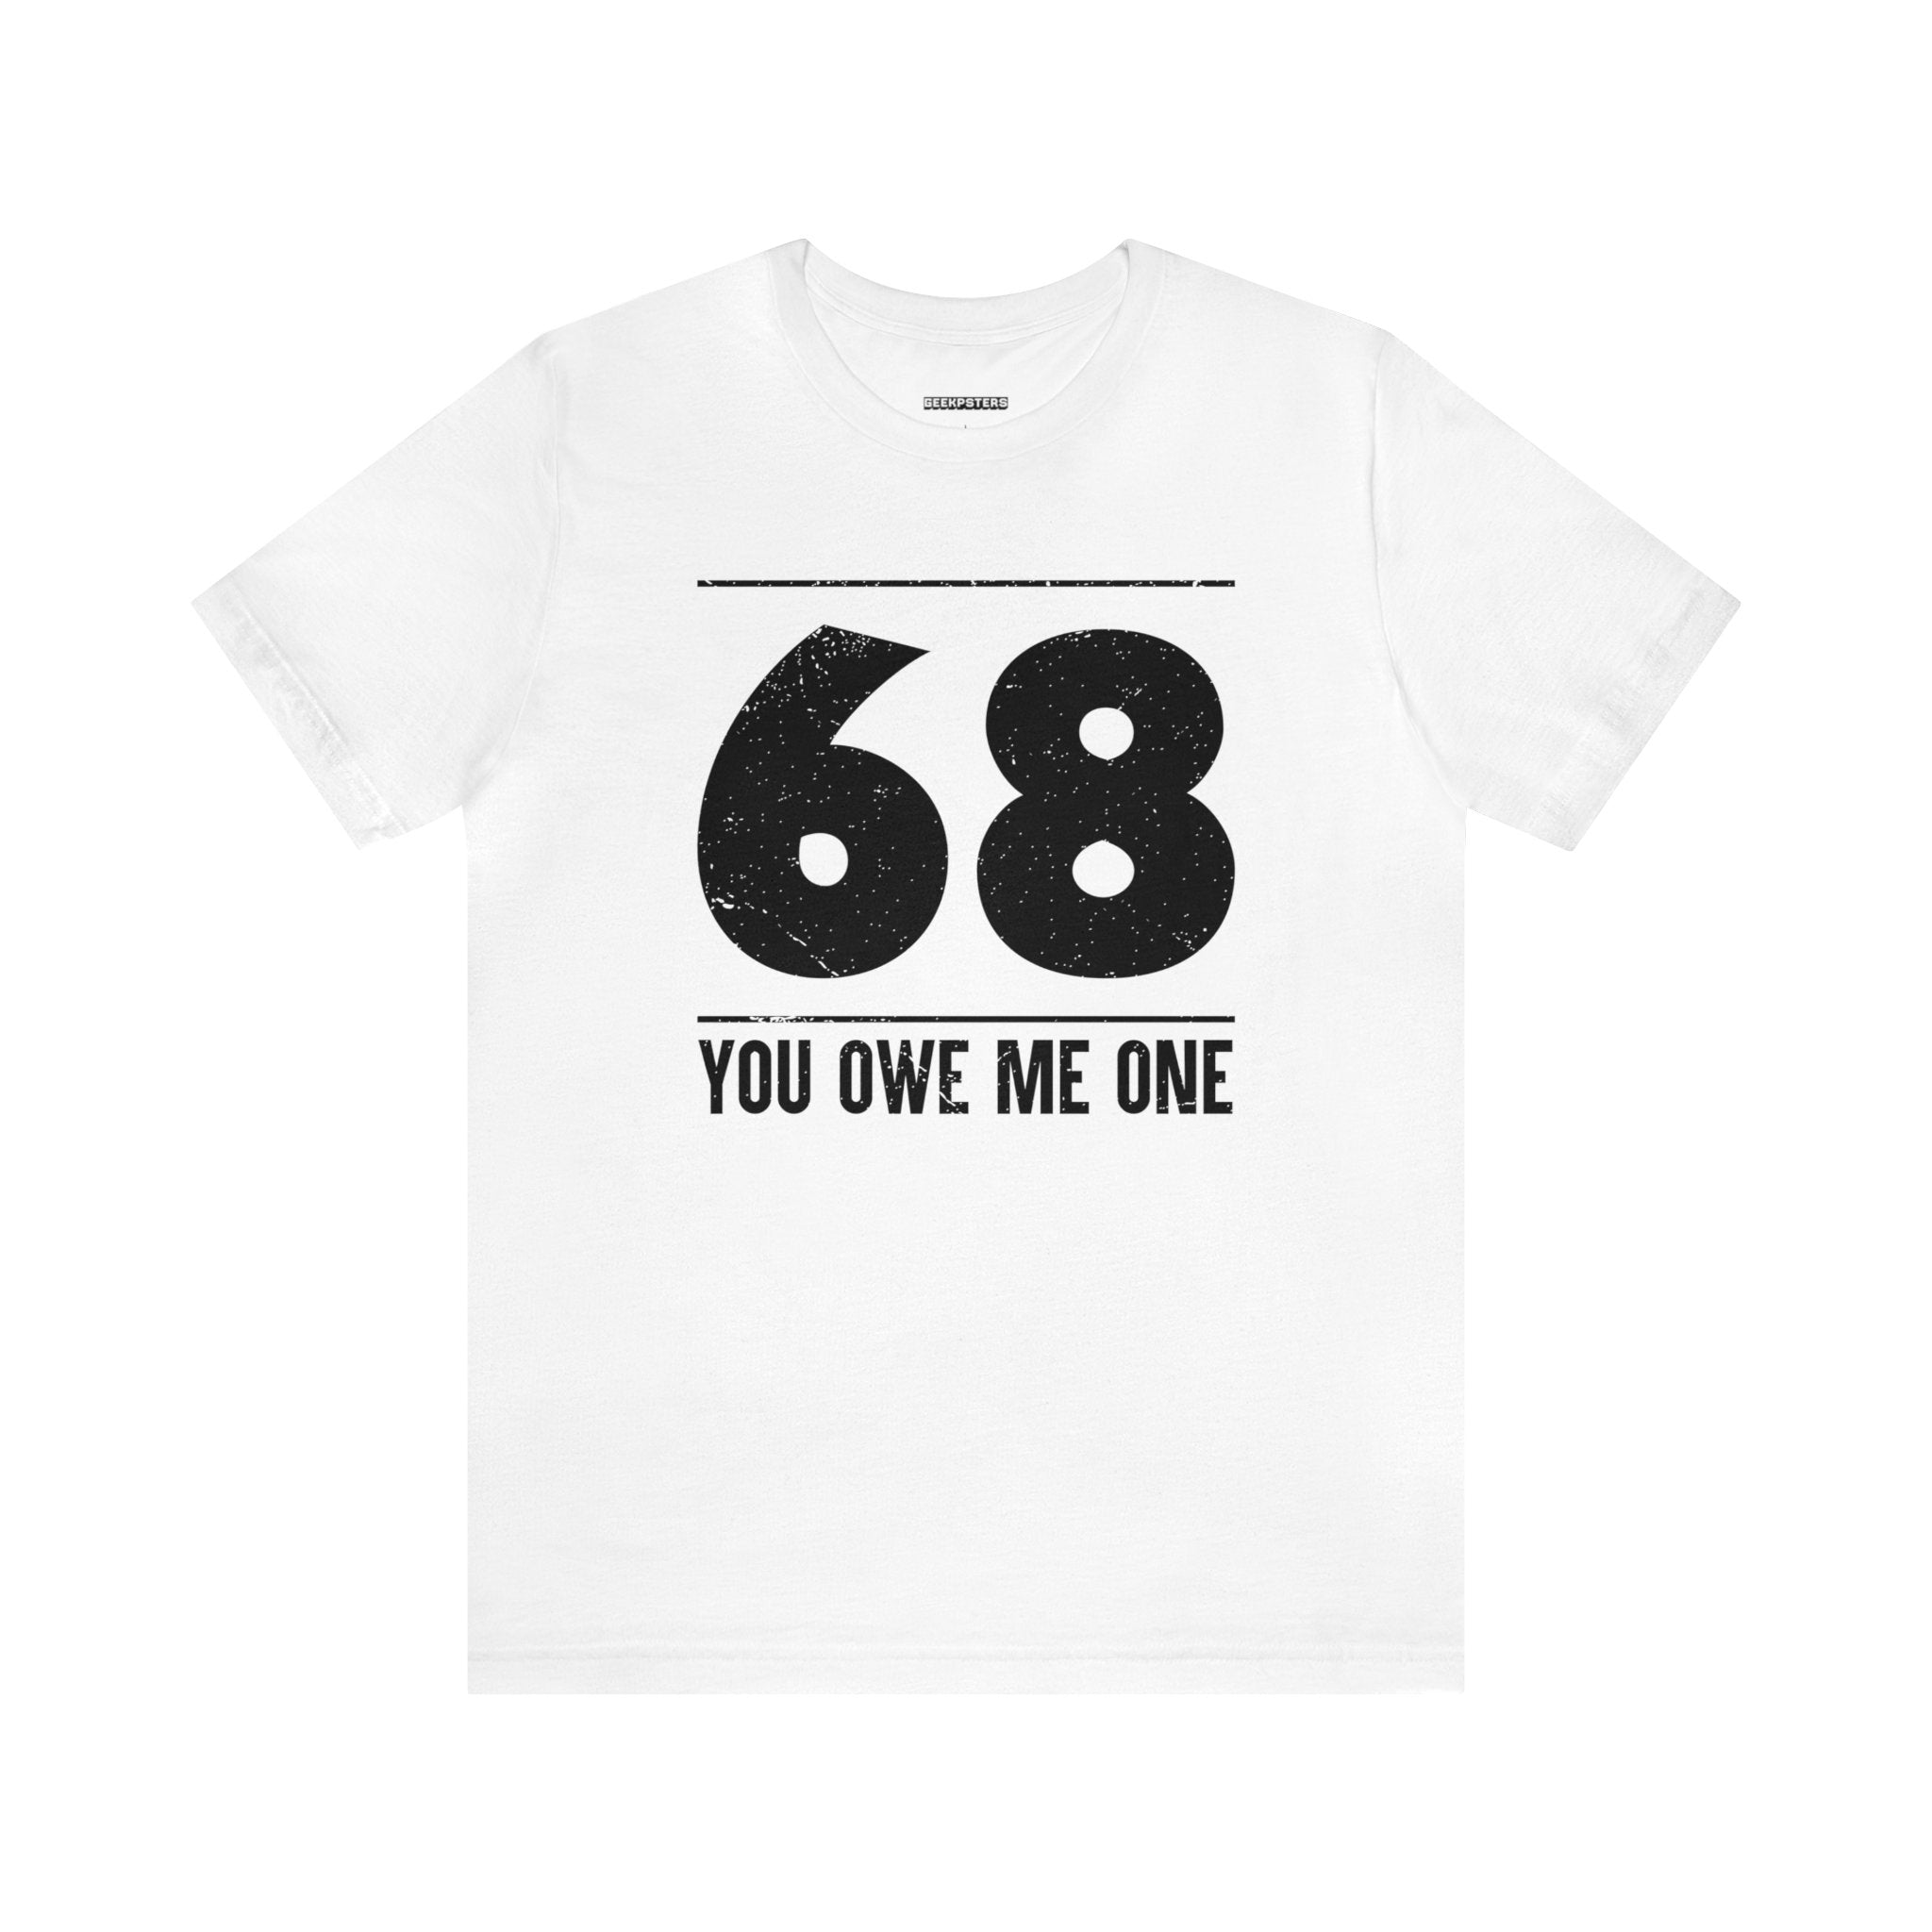 A geeky white shirt with the number 68 You Owe Me One - an awesome deal for only one.